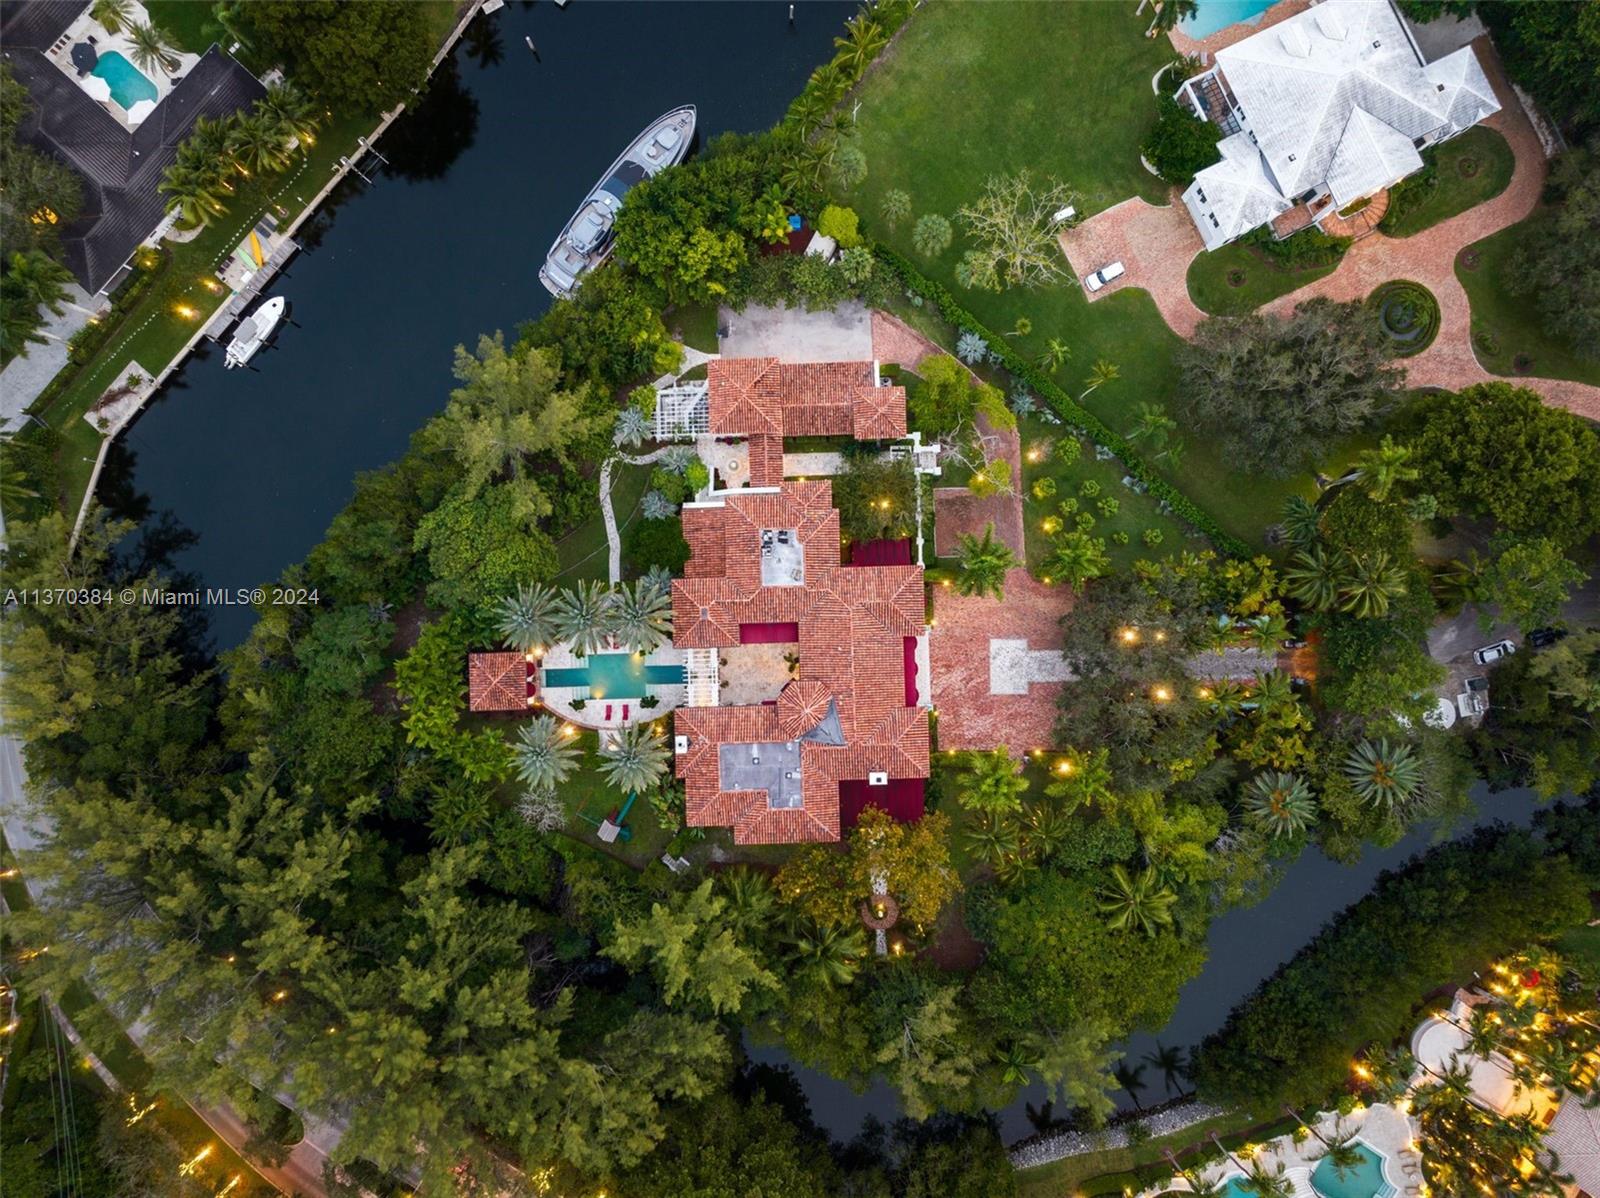 9401 Journeys End Rd, Coral Gables, FL, 33156 United States, 7 Bedrooms Bedrooms, ,8 BathroomsBathrooms,Residential,For Sale,Journeys End Rd,A11370384